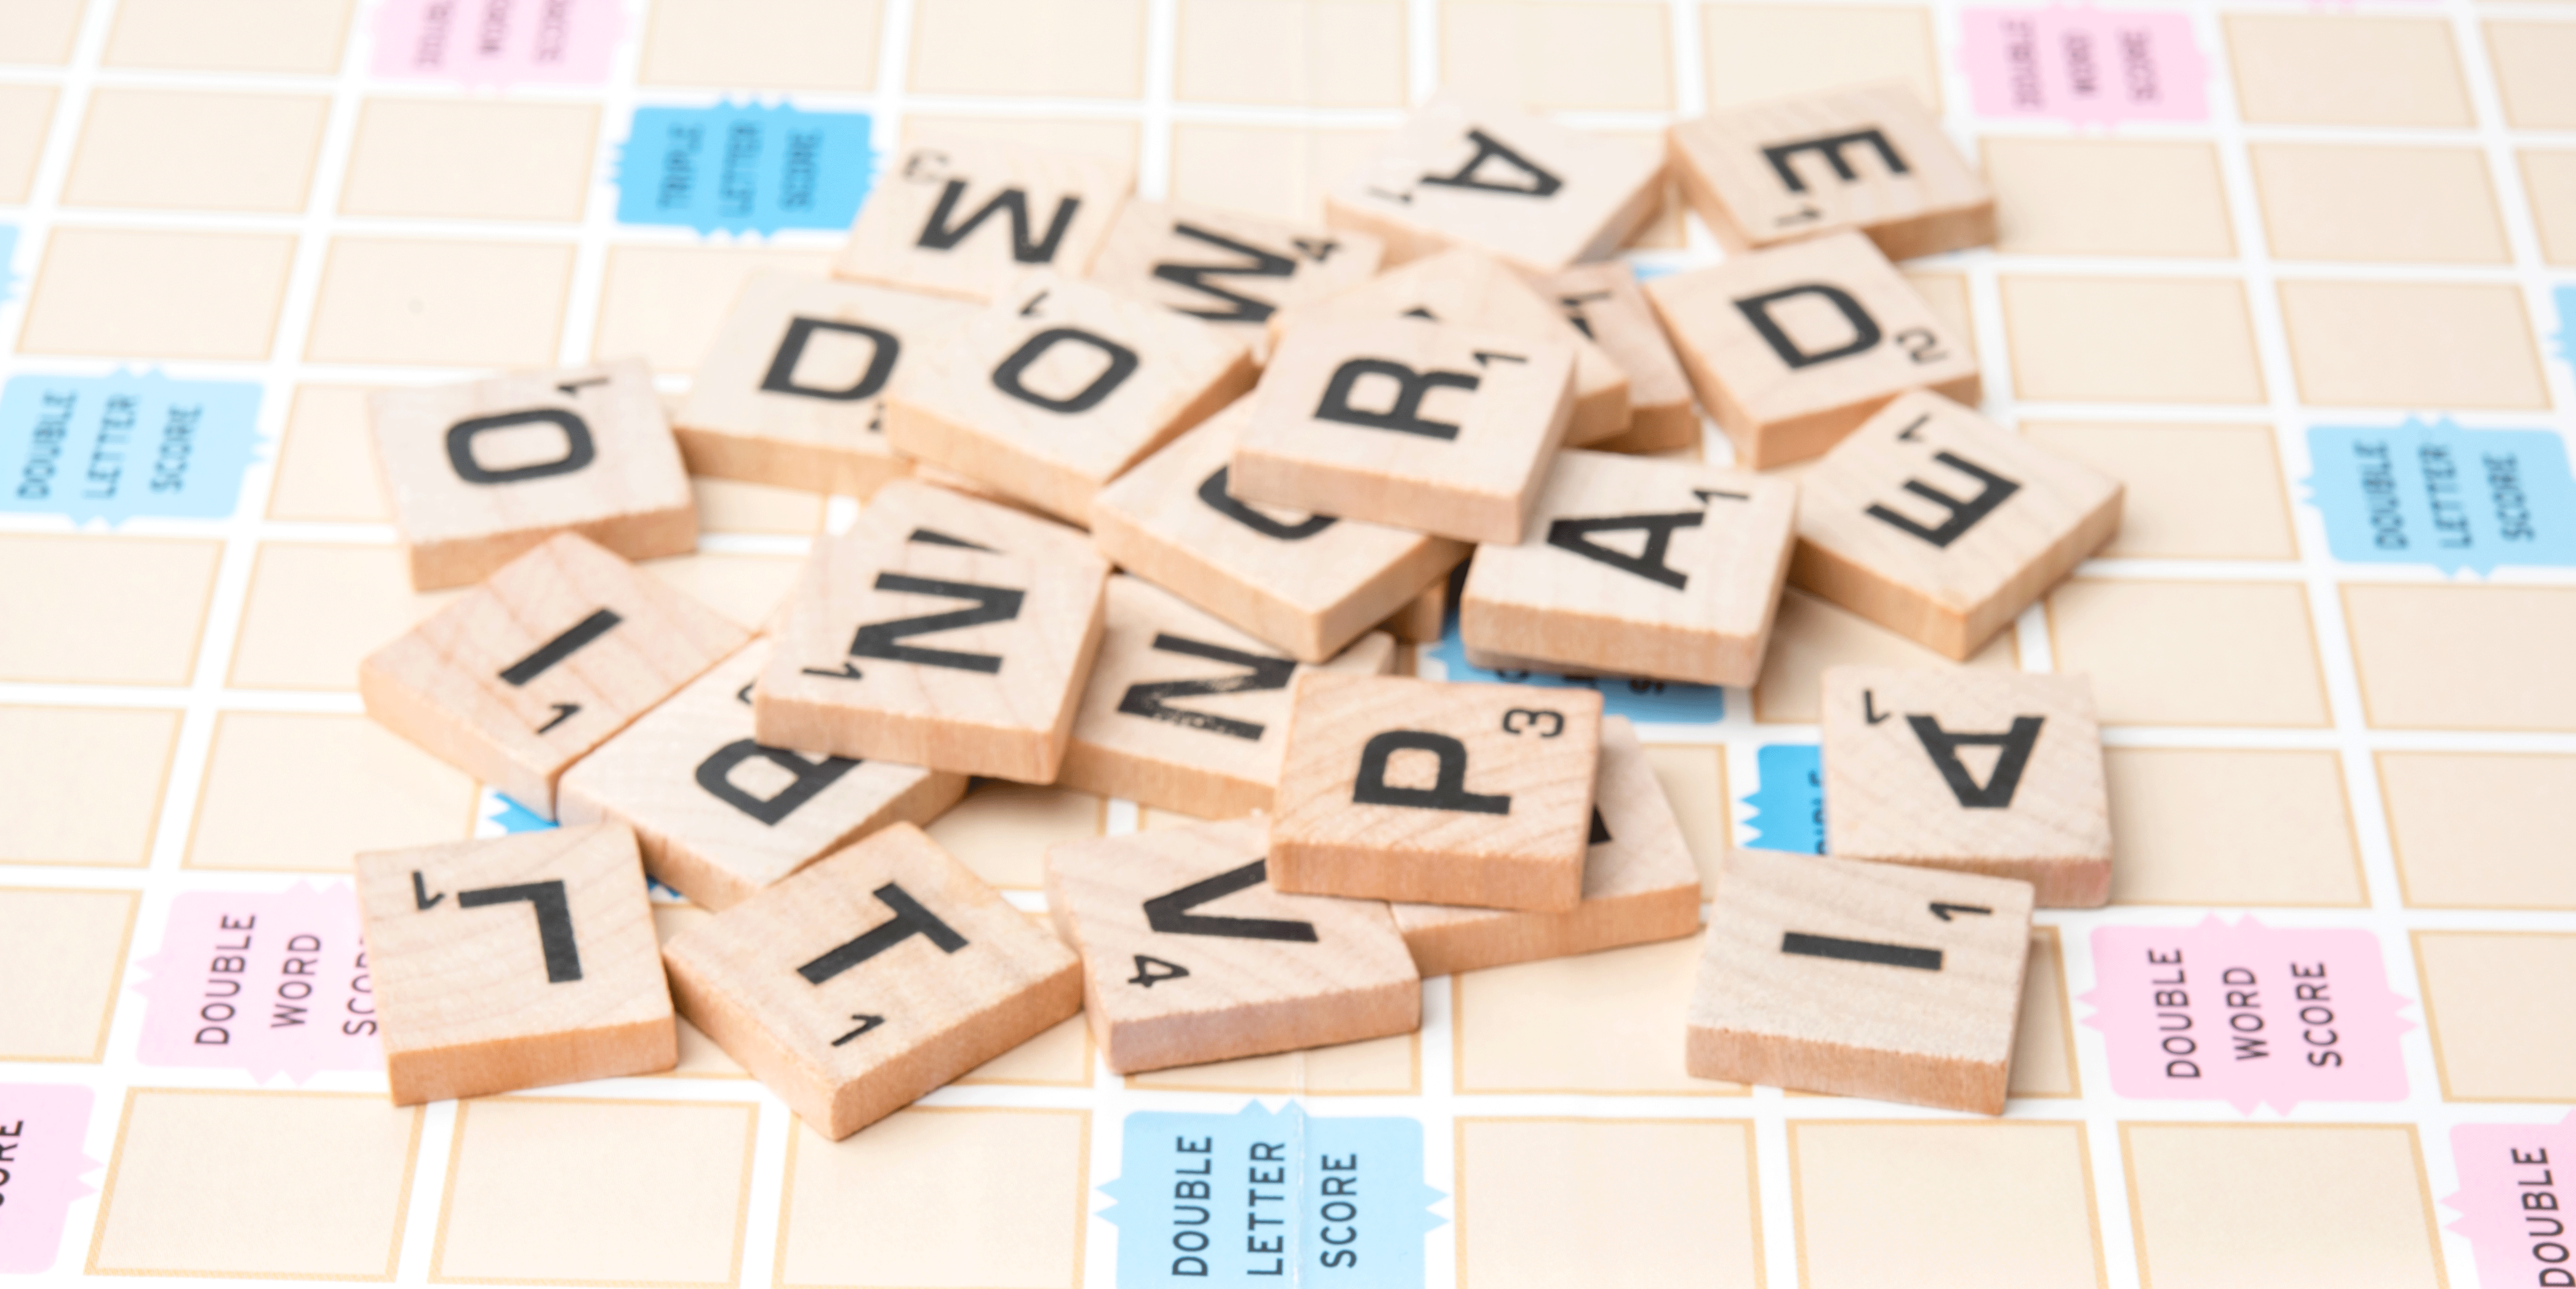 Dabble Word Game: Award Winning board games that Improve Memory, Spelling,  and Vocabulary - Fun educational family games for Kids, the Whole Family